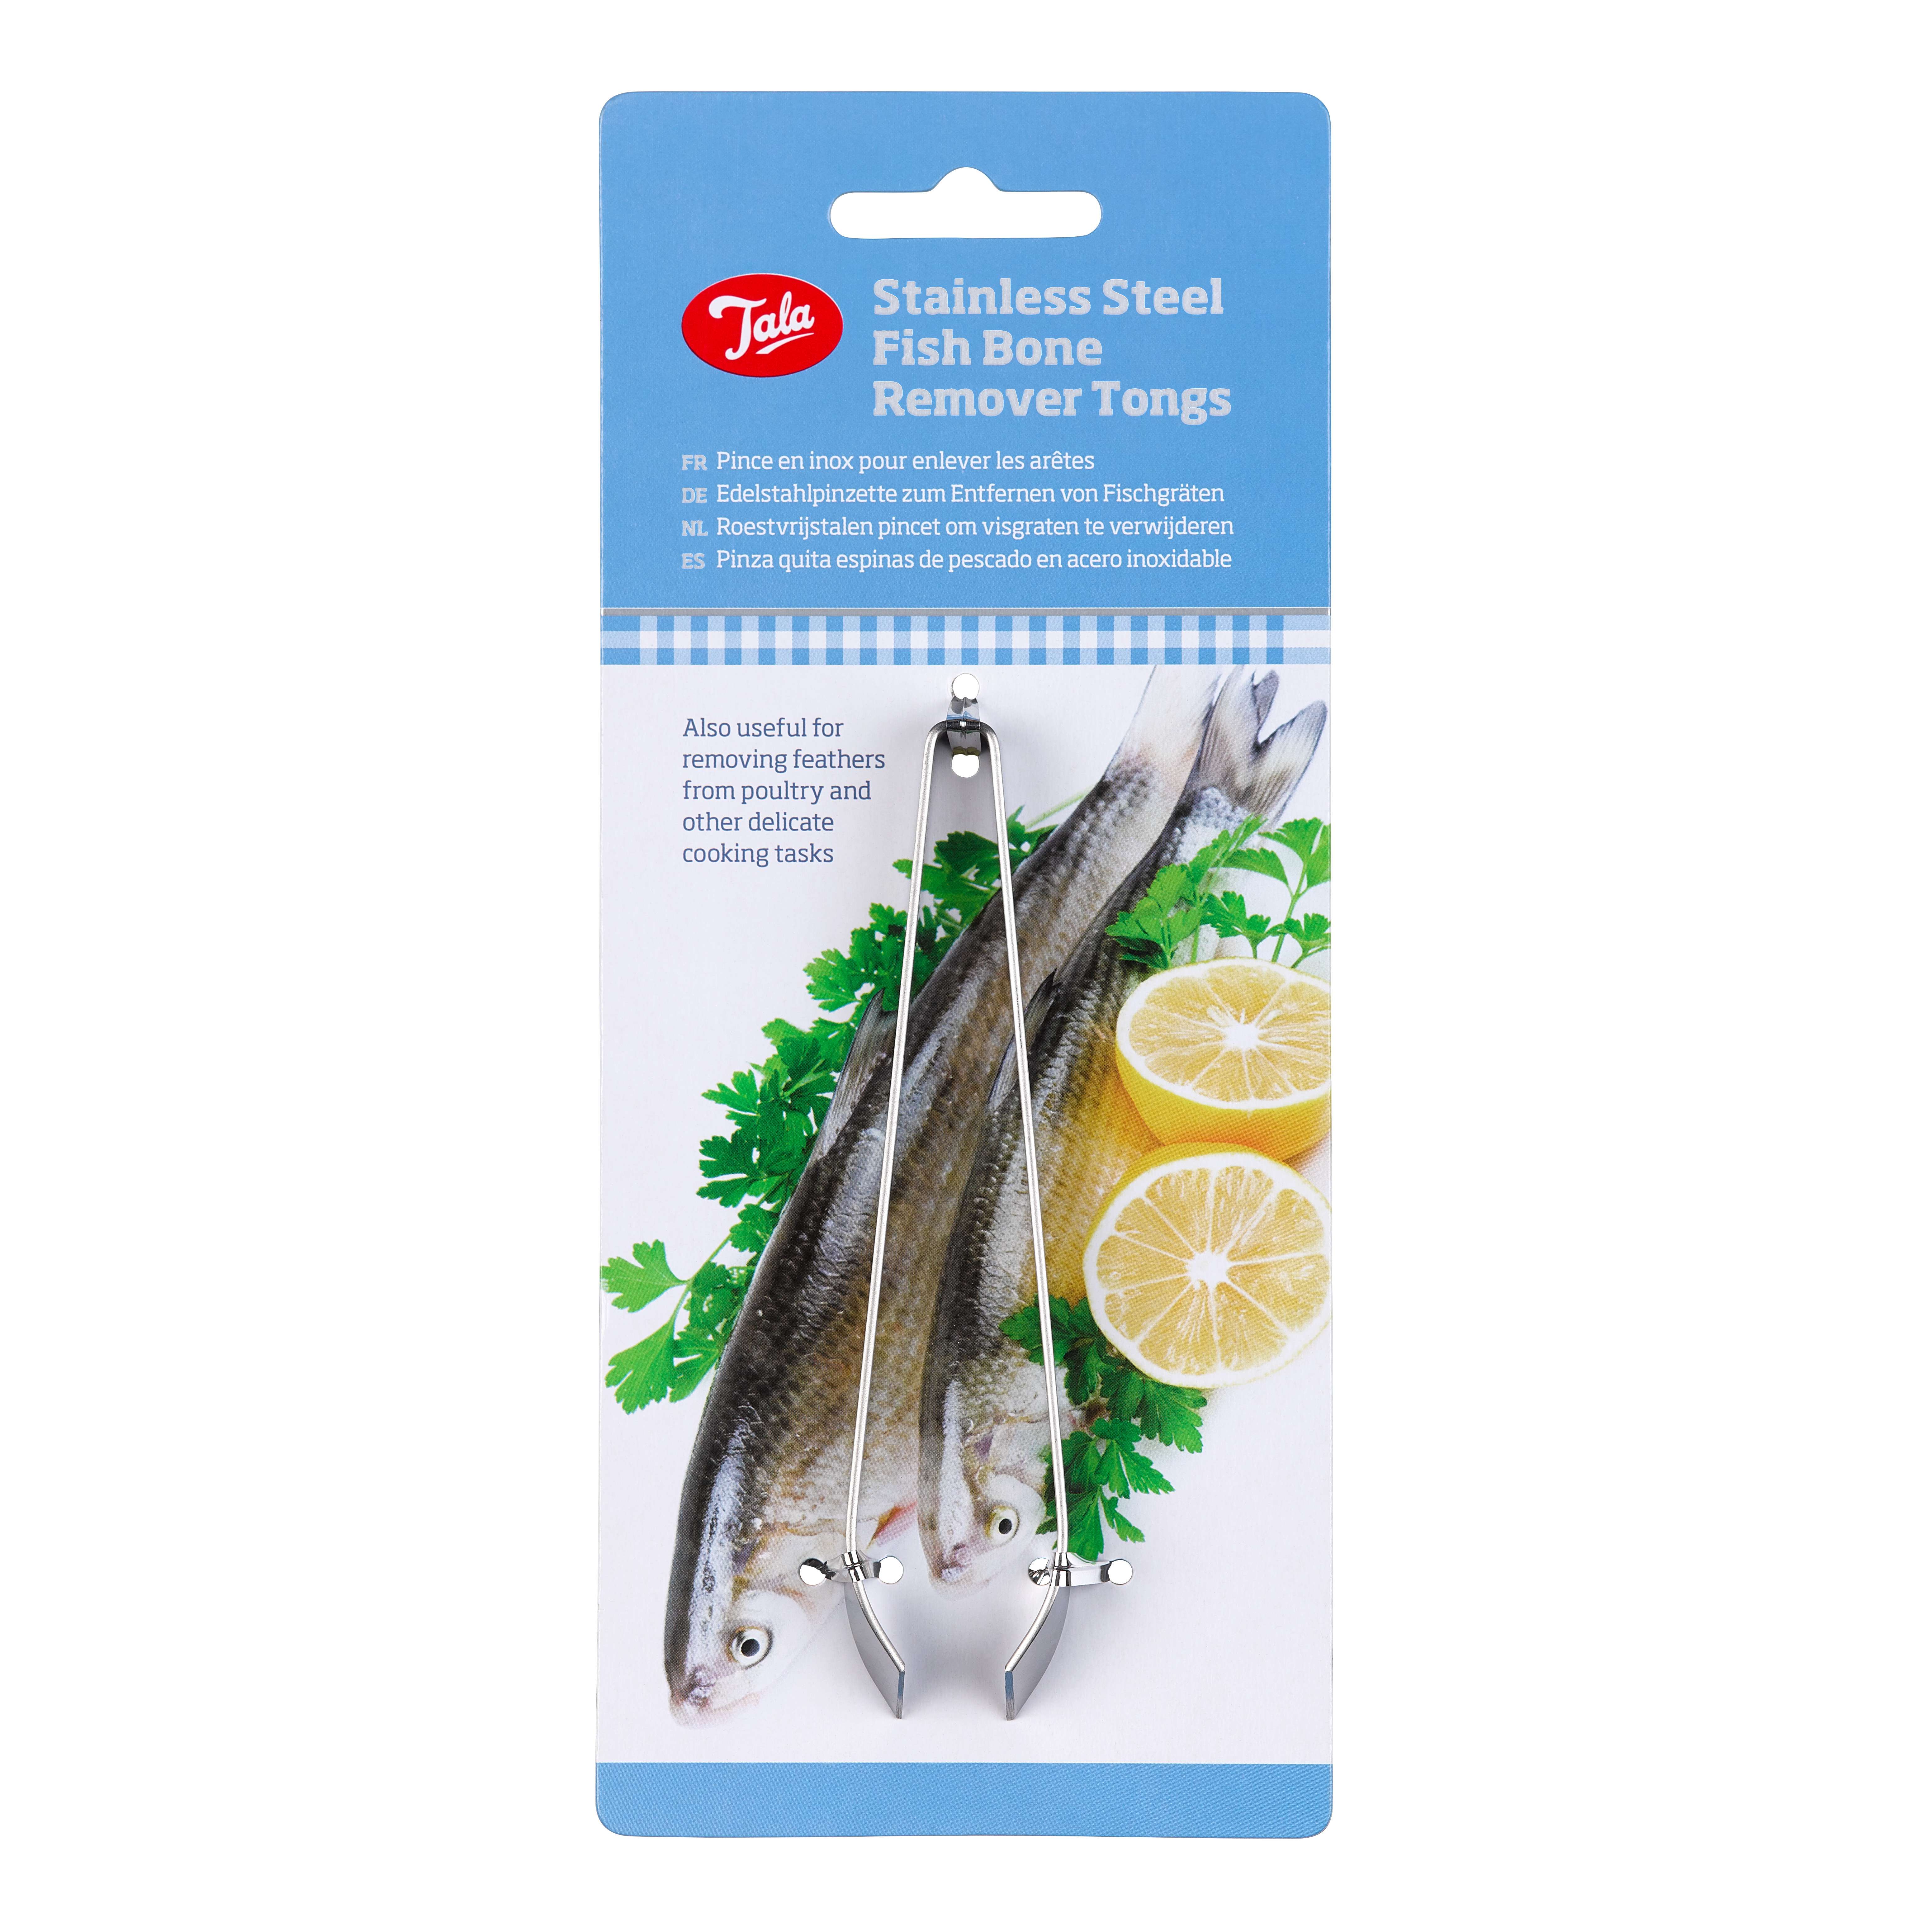 Tala Stainless Steel Fish Bone remover Tongs